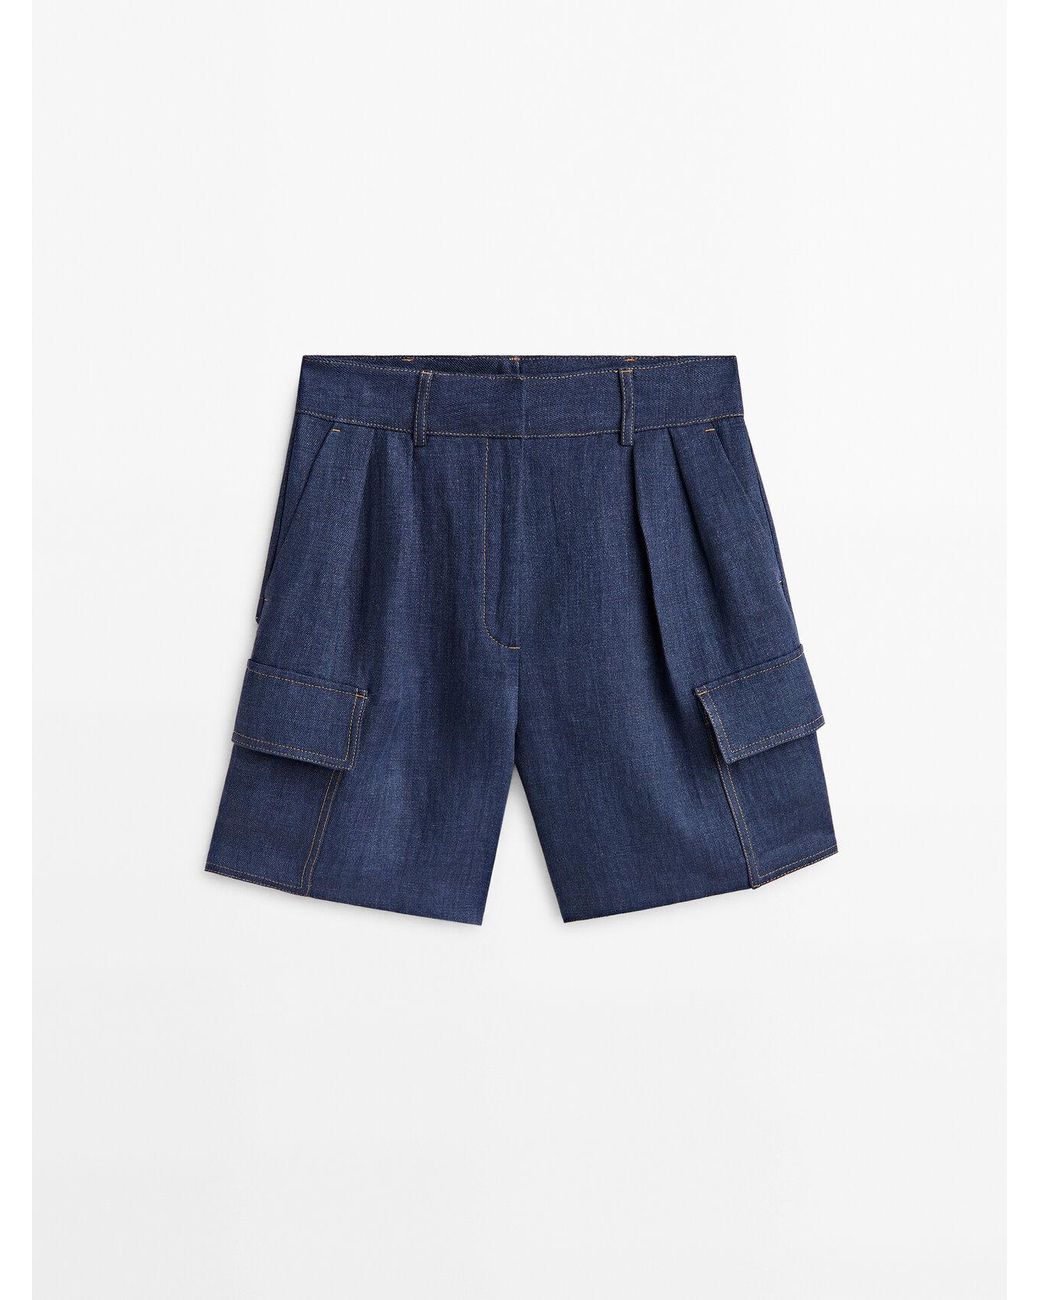 MASSIMO DUTTI Linen Cargo Bermuda Shorts With Topstitching in